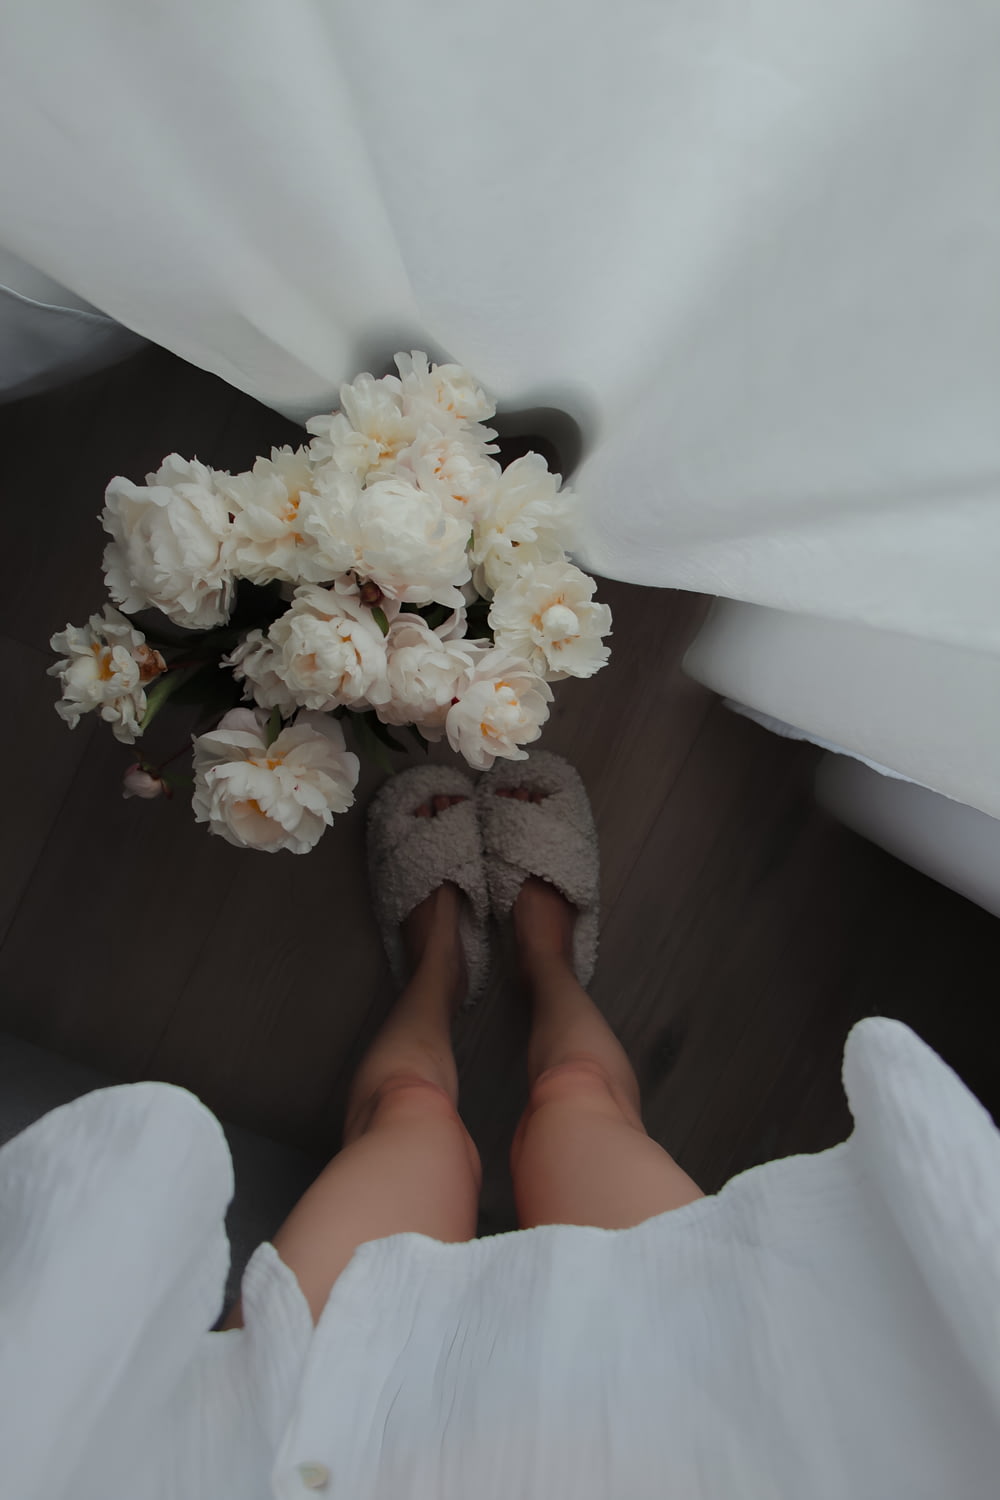 a bouquet of white flowers sitting on top of a person's feet